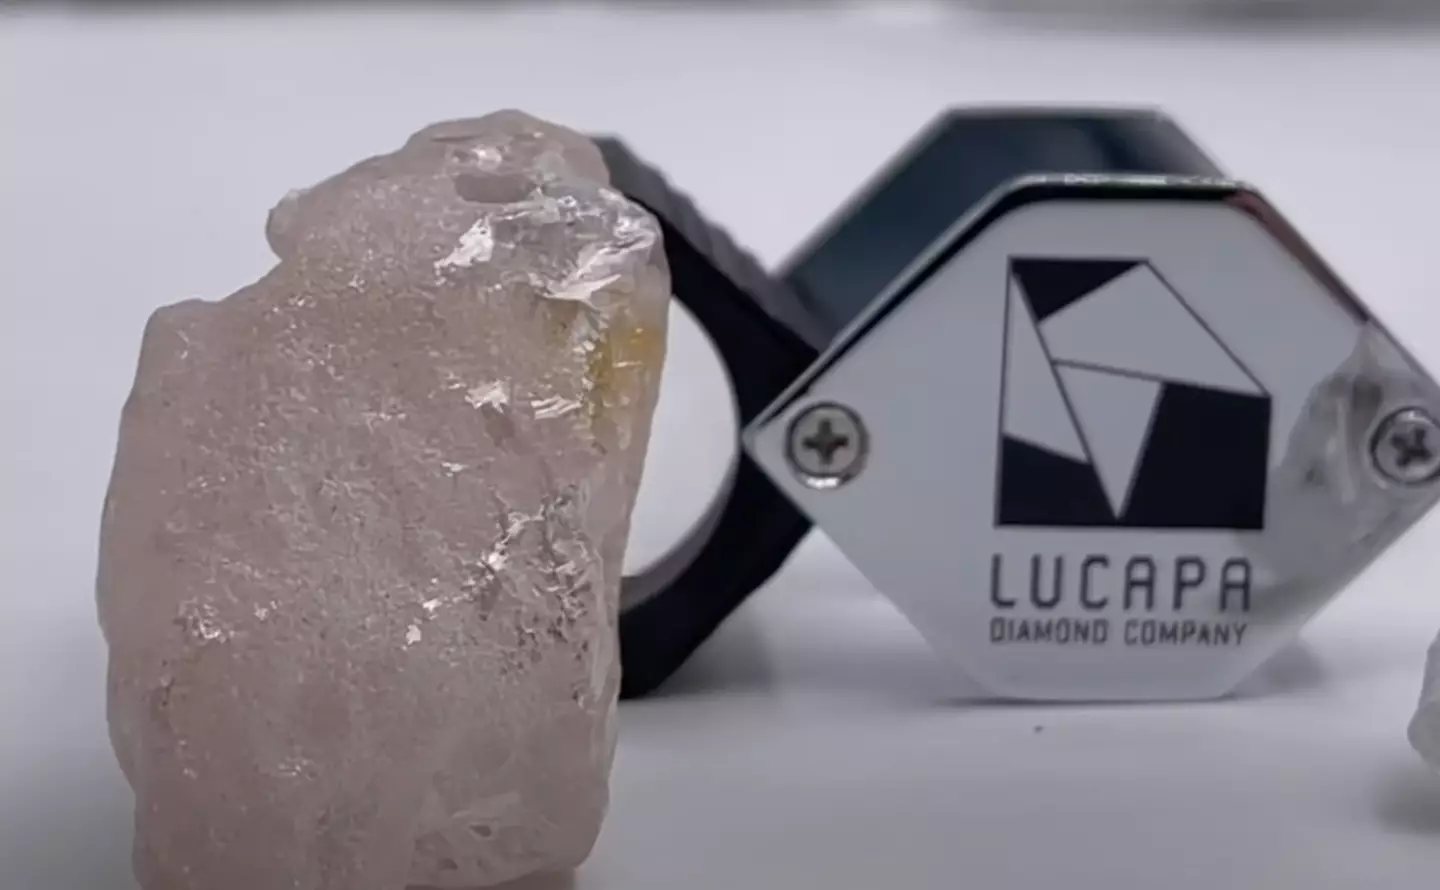 Four other diamonds larger than the Lulo Rose have previously been found at the site.